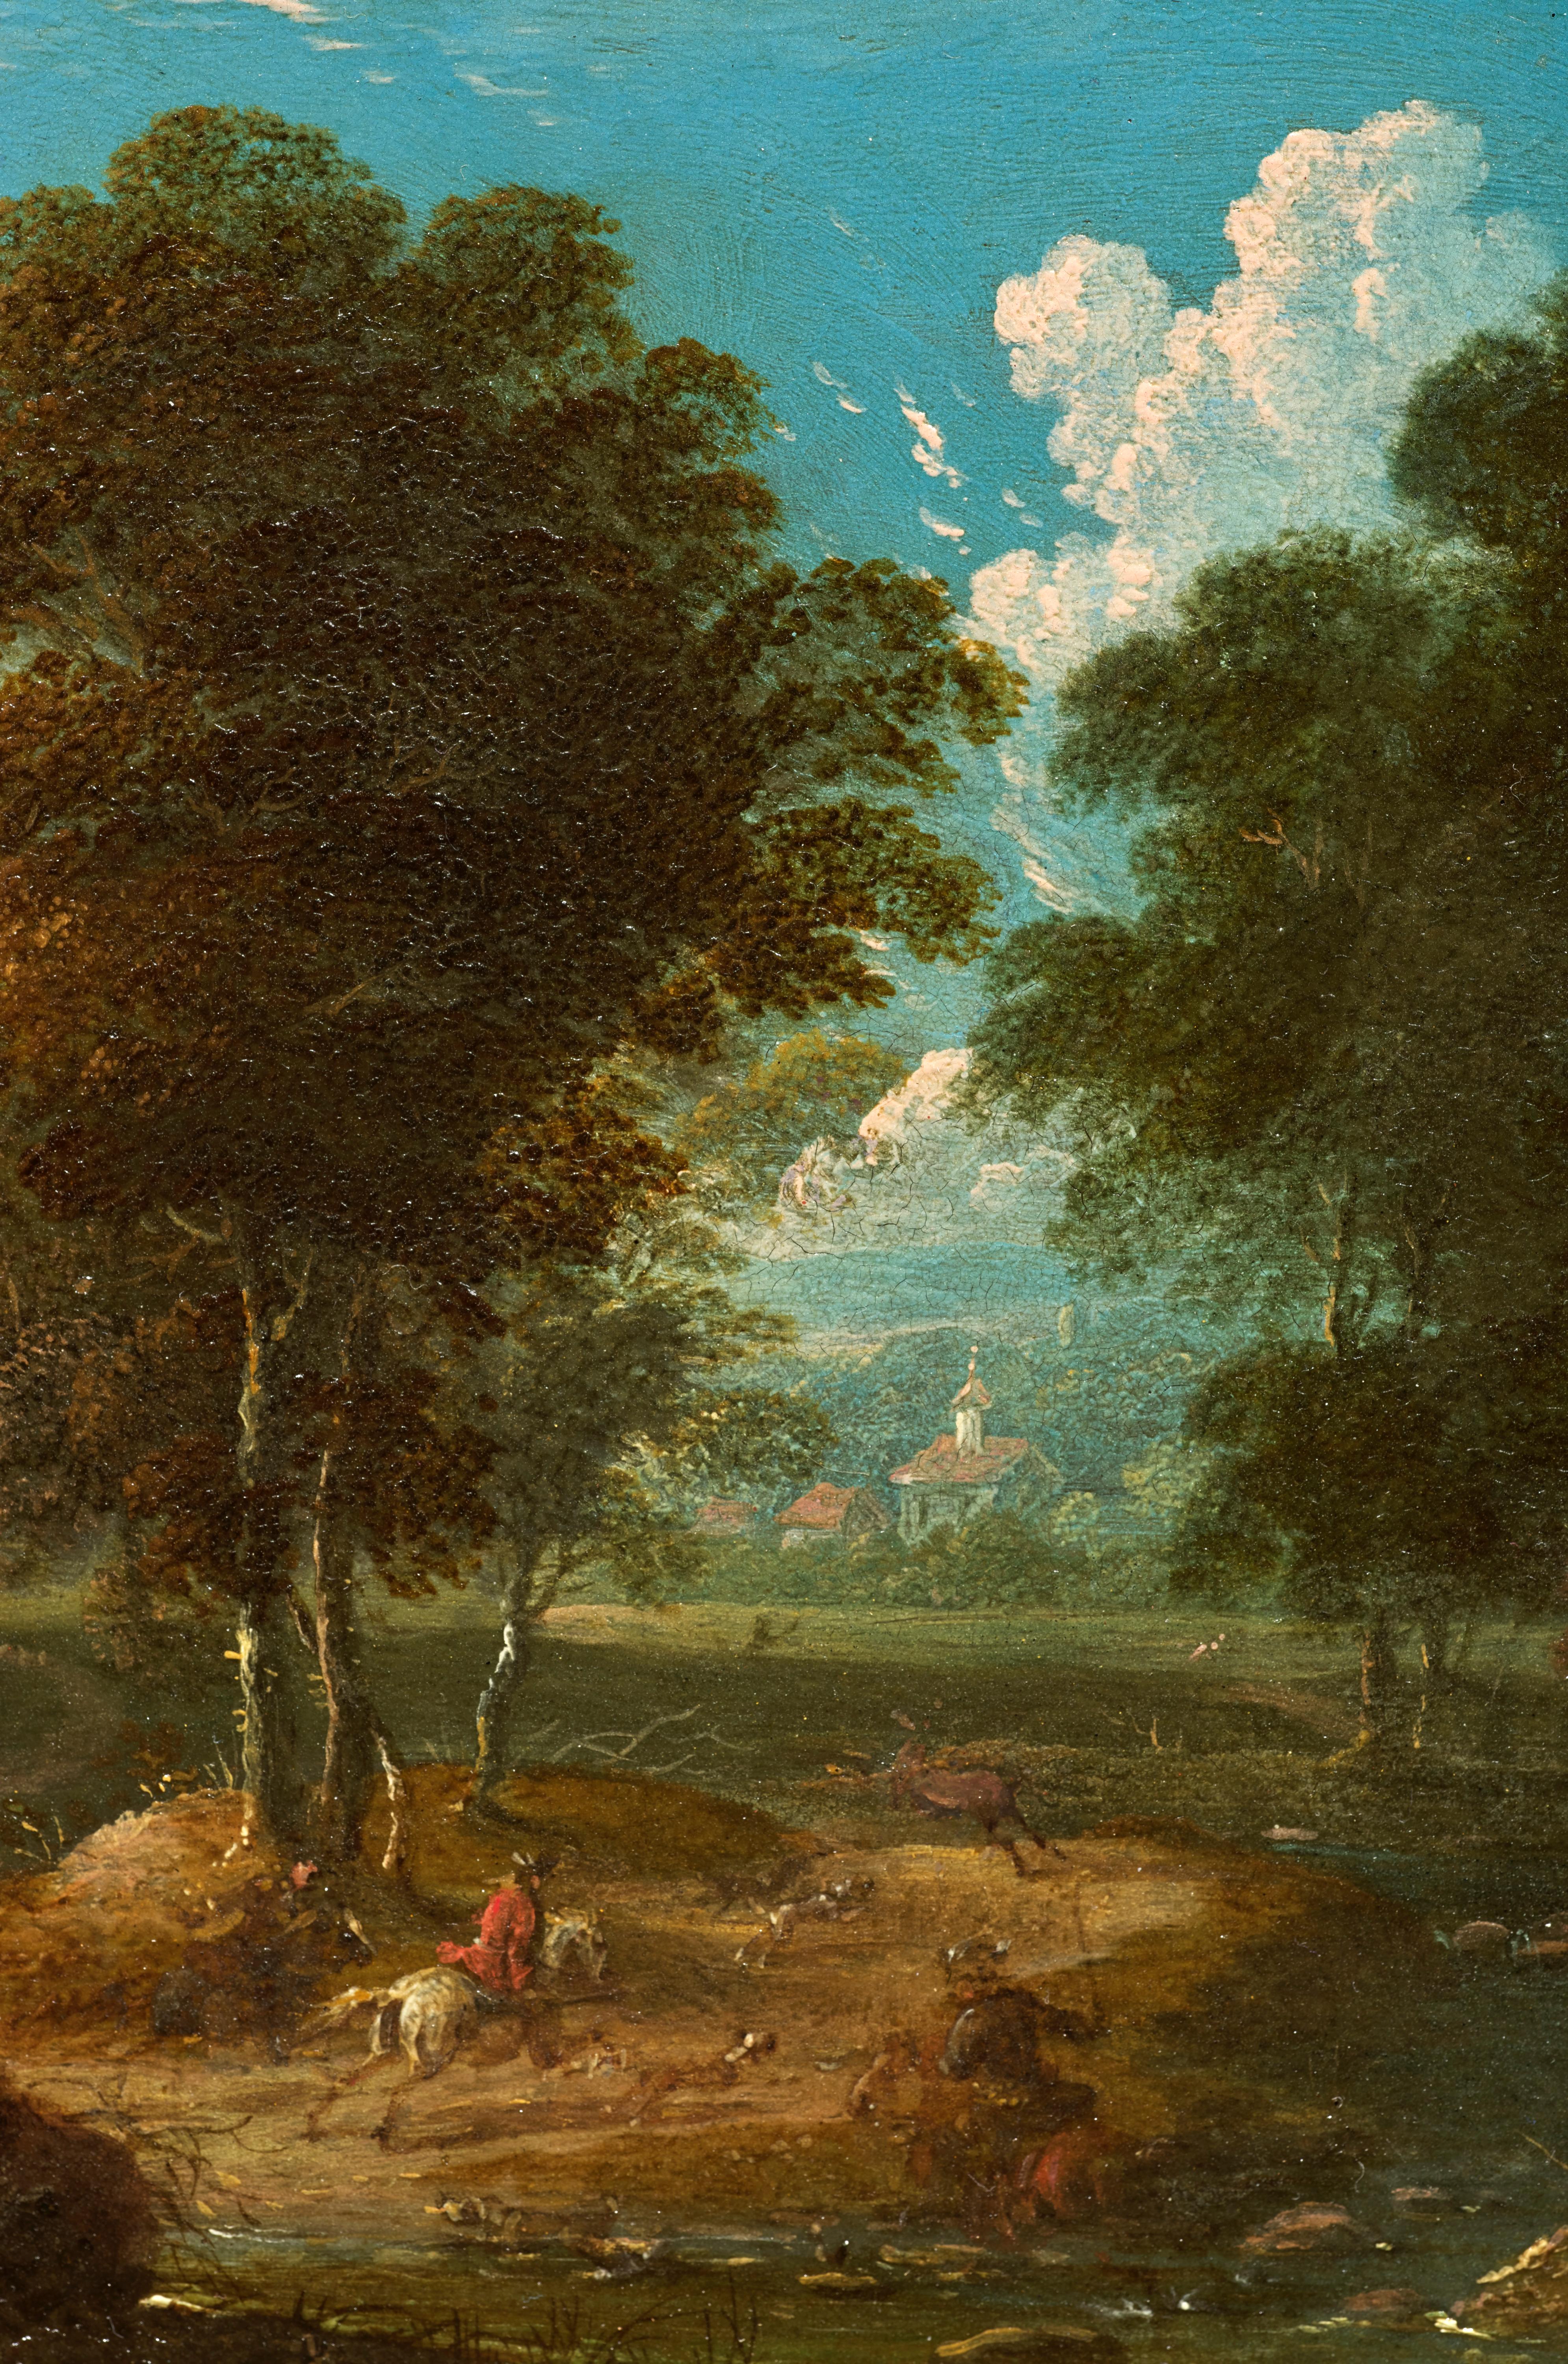 This small landscape shows a hunting scene: two riders are chasing a stag with their dogs at the edge of a forest. Signed by Peter von Bemmel, it is typical of the production of this artist, in the great tradition of Dutch landscapes.

1.	Peter von